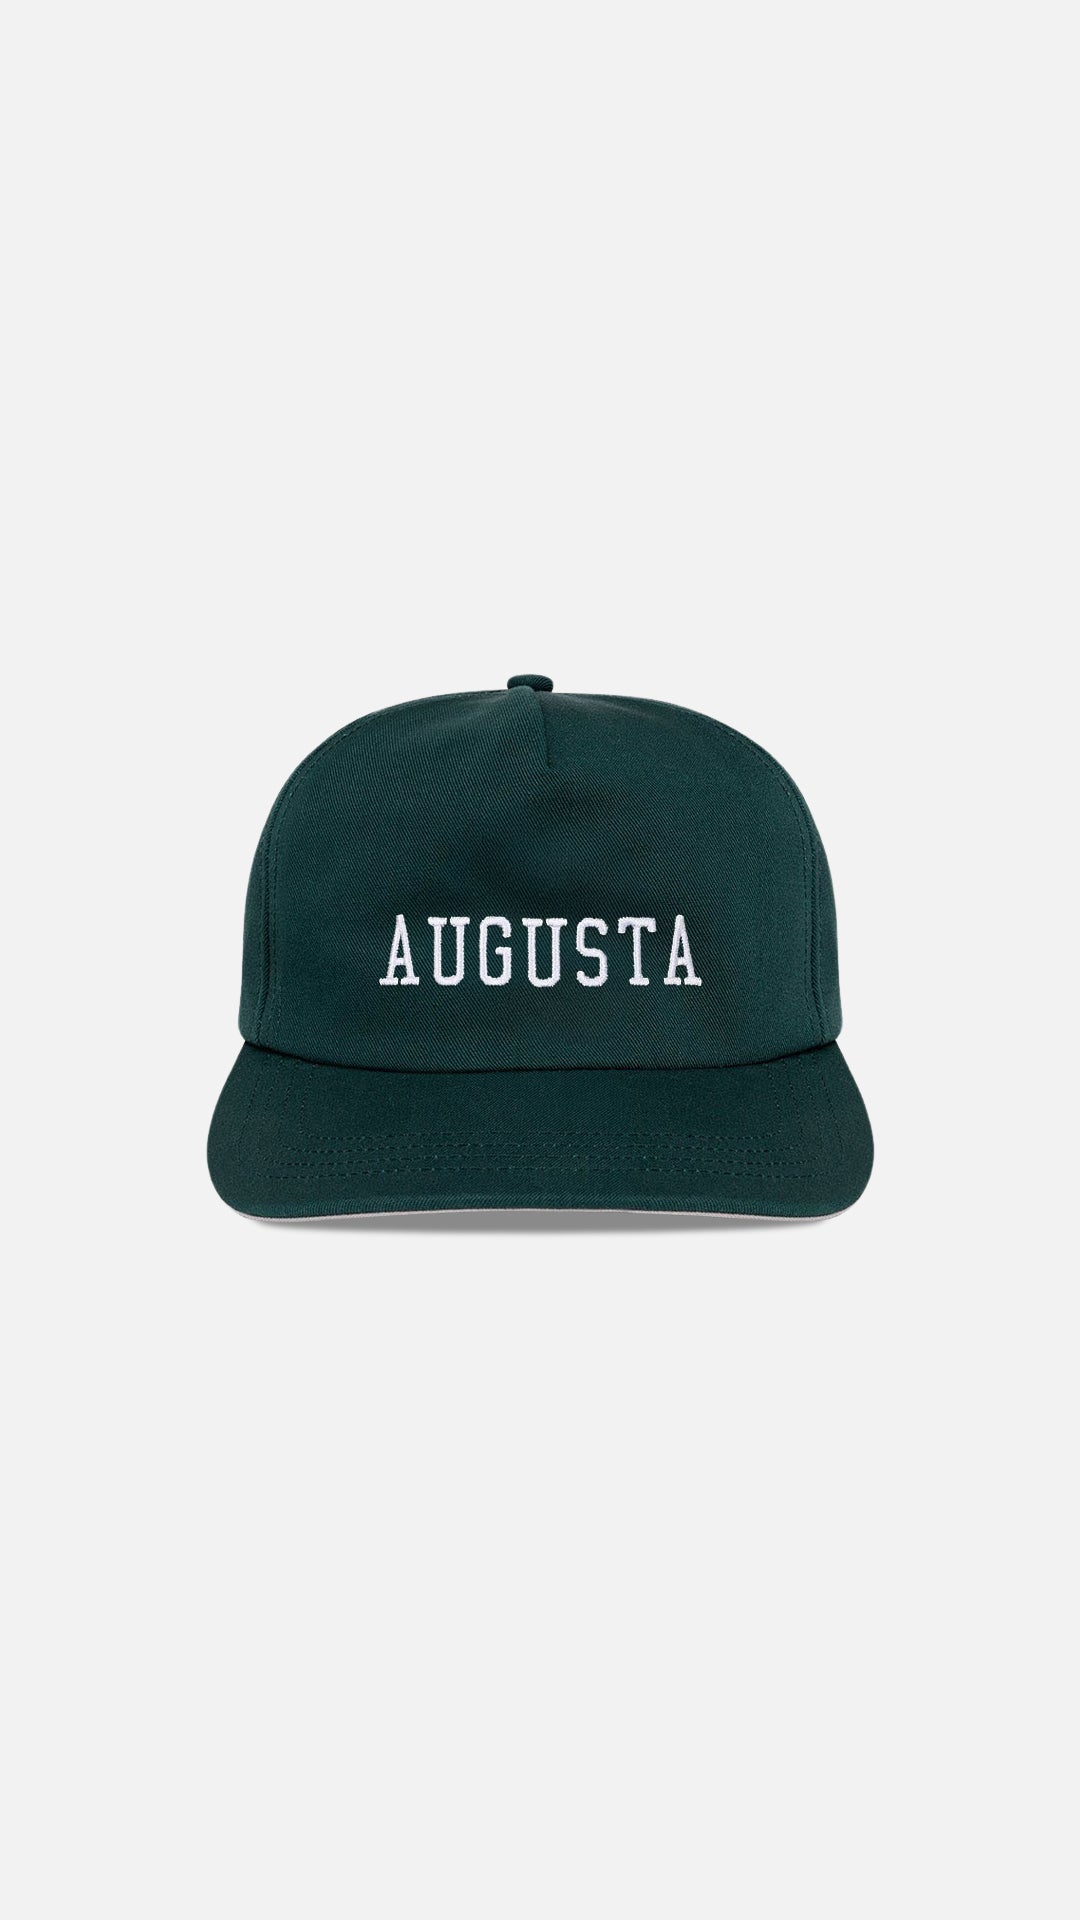 Augusta Snapback Forest Green